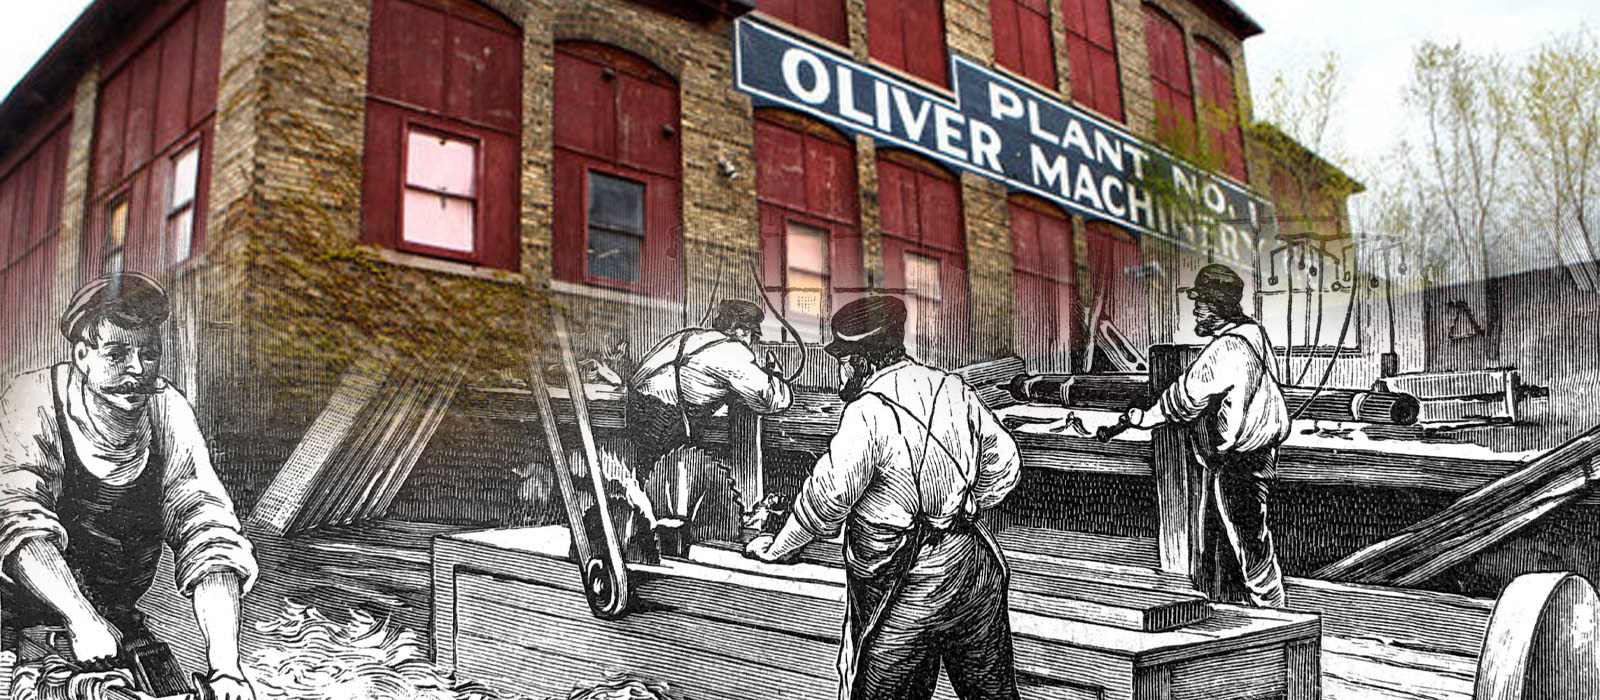 Oliver Machinery Grand Rapids location